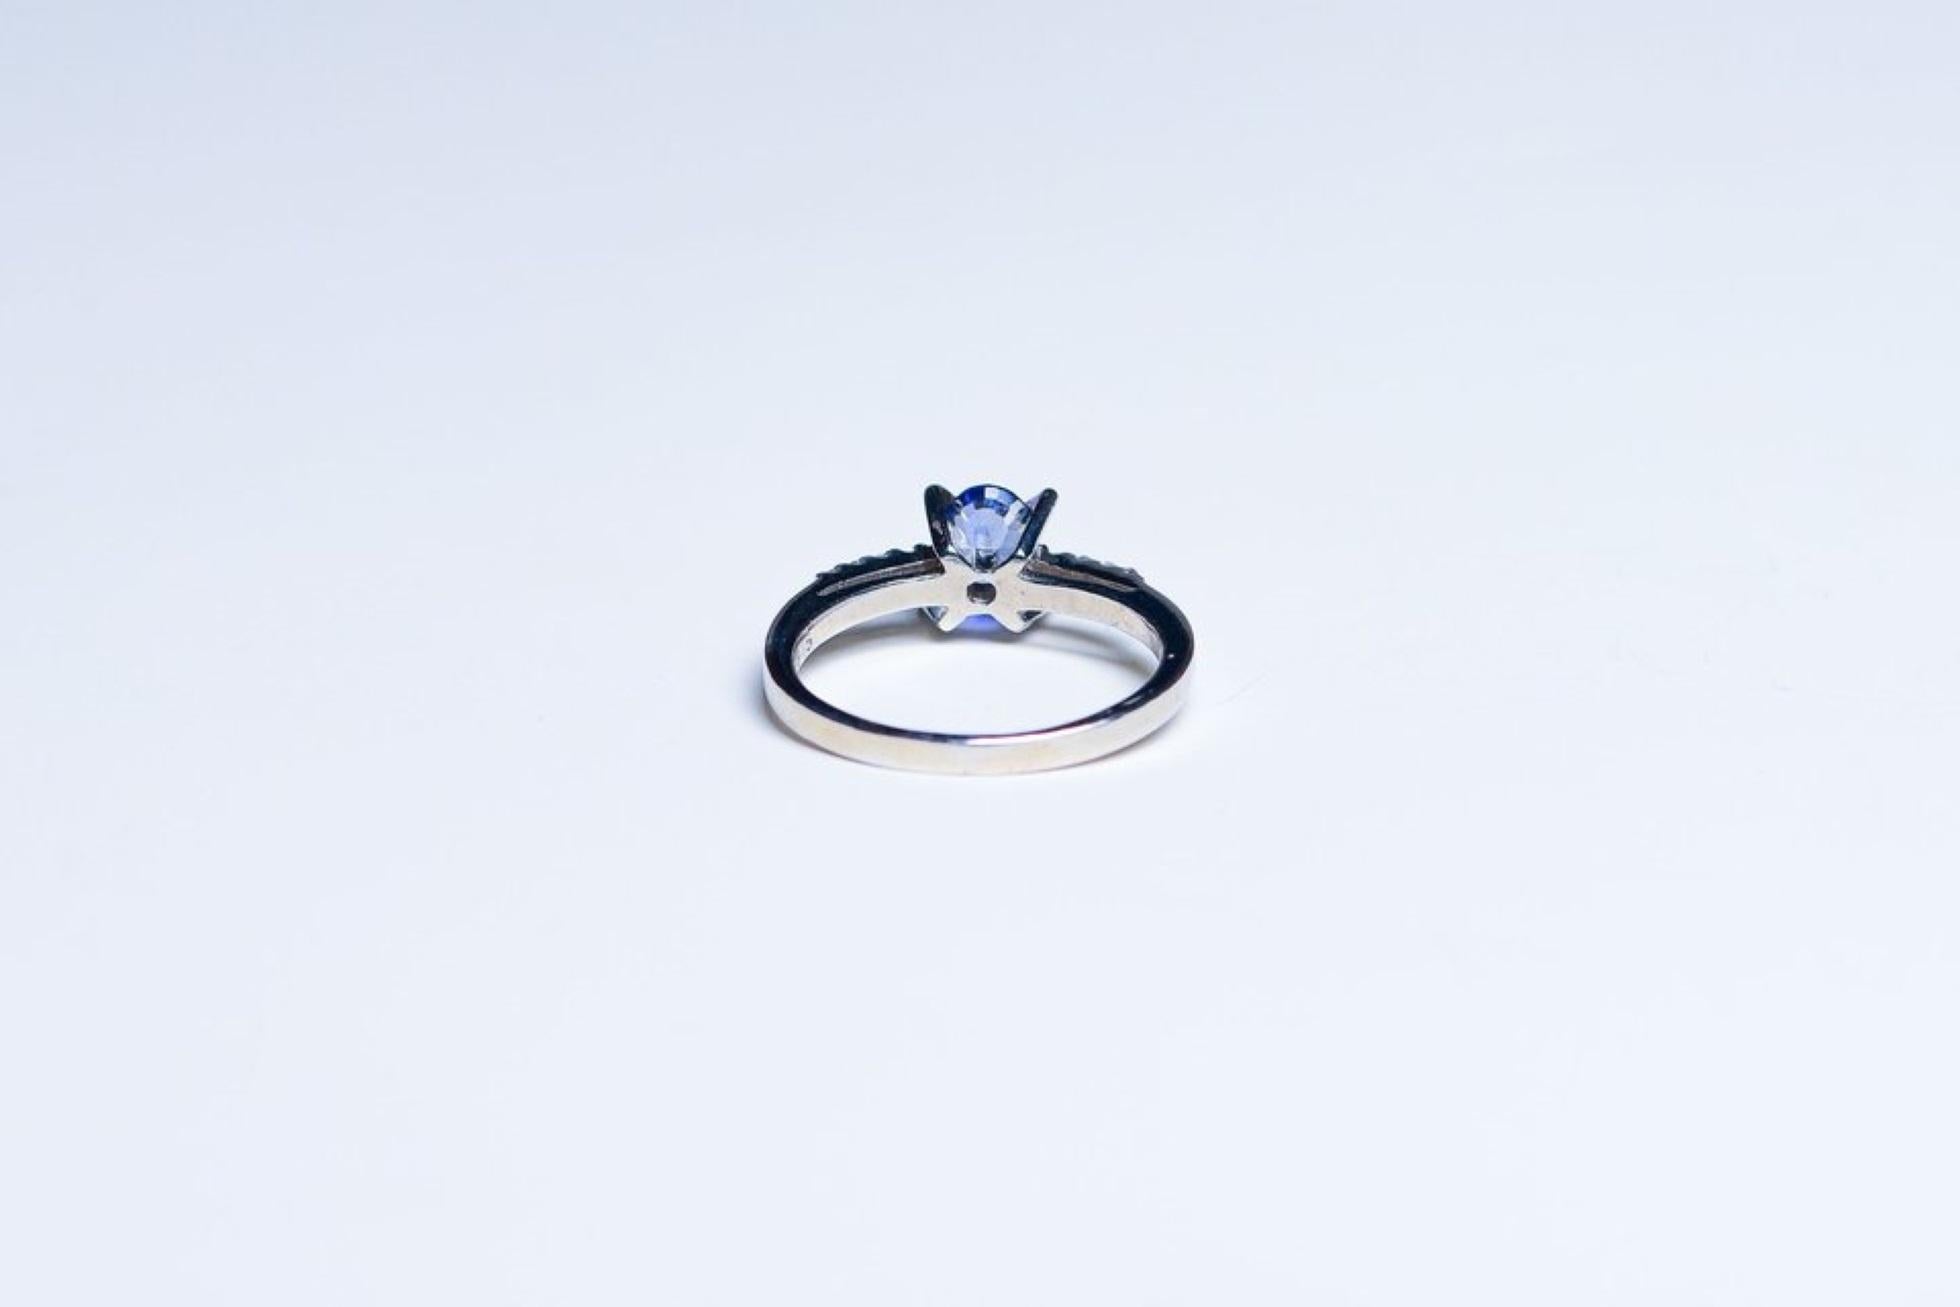  1ct Natural Untreated Oval Blue Sapphire 3 Stone Ring   In New Condition For Sale In Sheridan, WY